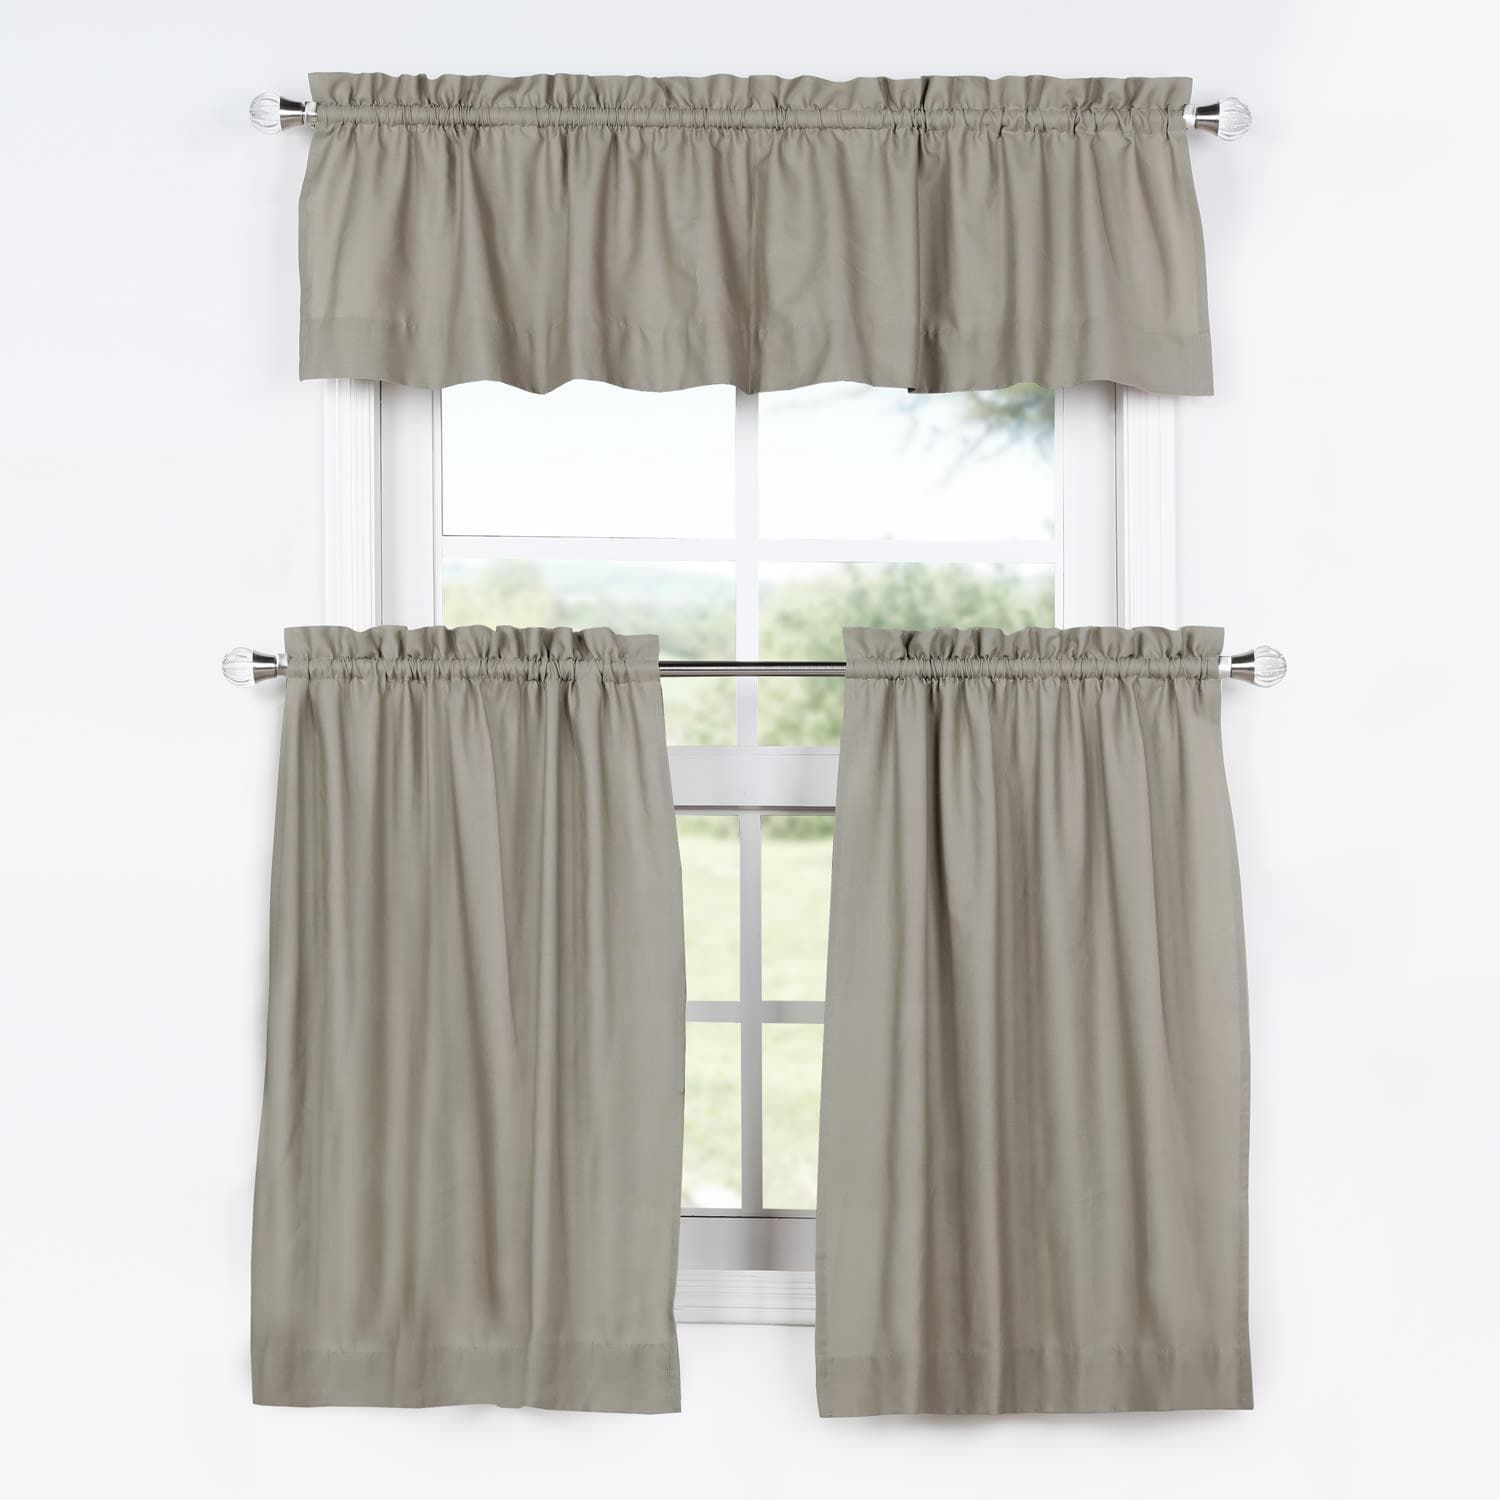 Millstone Gray Solid Cotton Kitchen Tier Curtain & Valance With Regard To Forest Valance And Tier Pair Curtains (View 20 of 20)